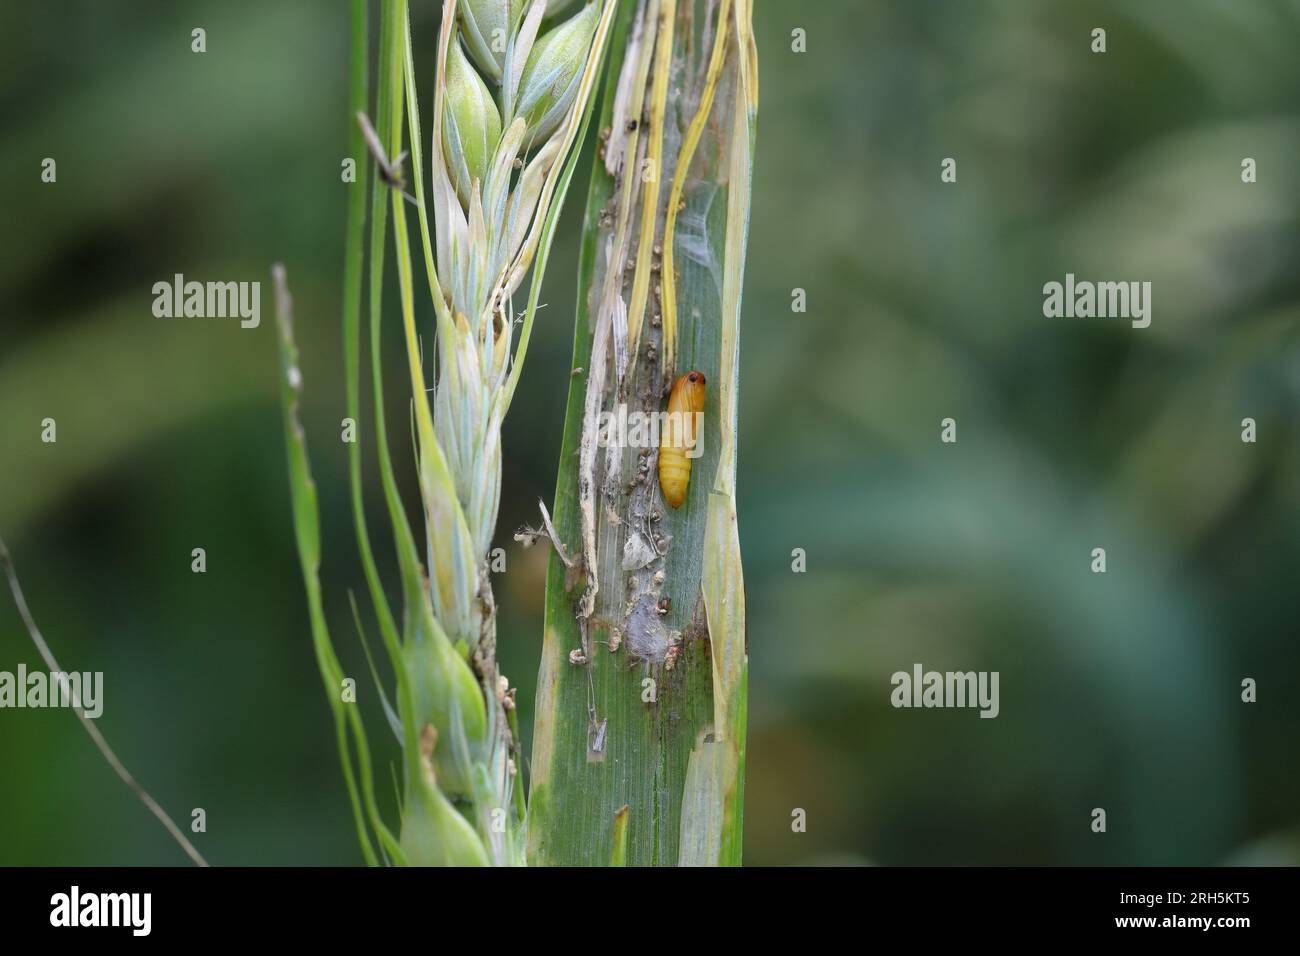 A stem of barley damaged by a caterpillar of meadow shade moth (Cnephasia pasiuana). Its pupa is visible. Stock Photo